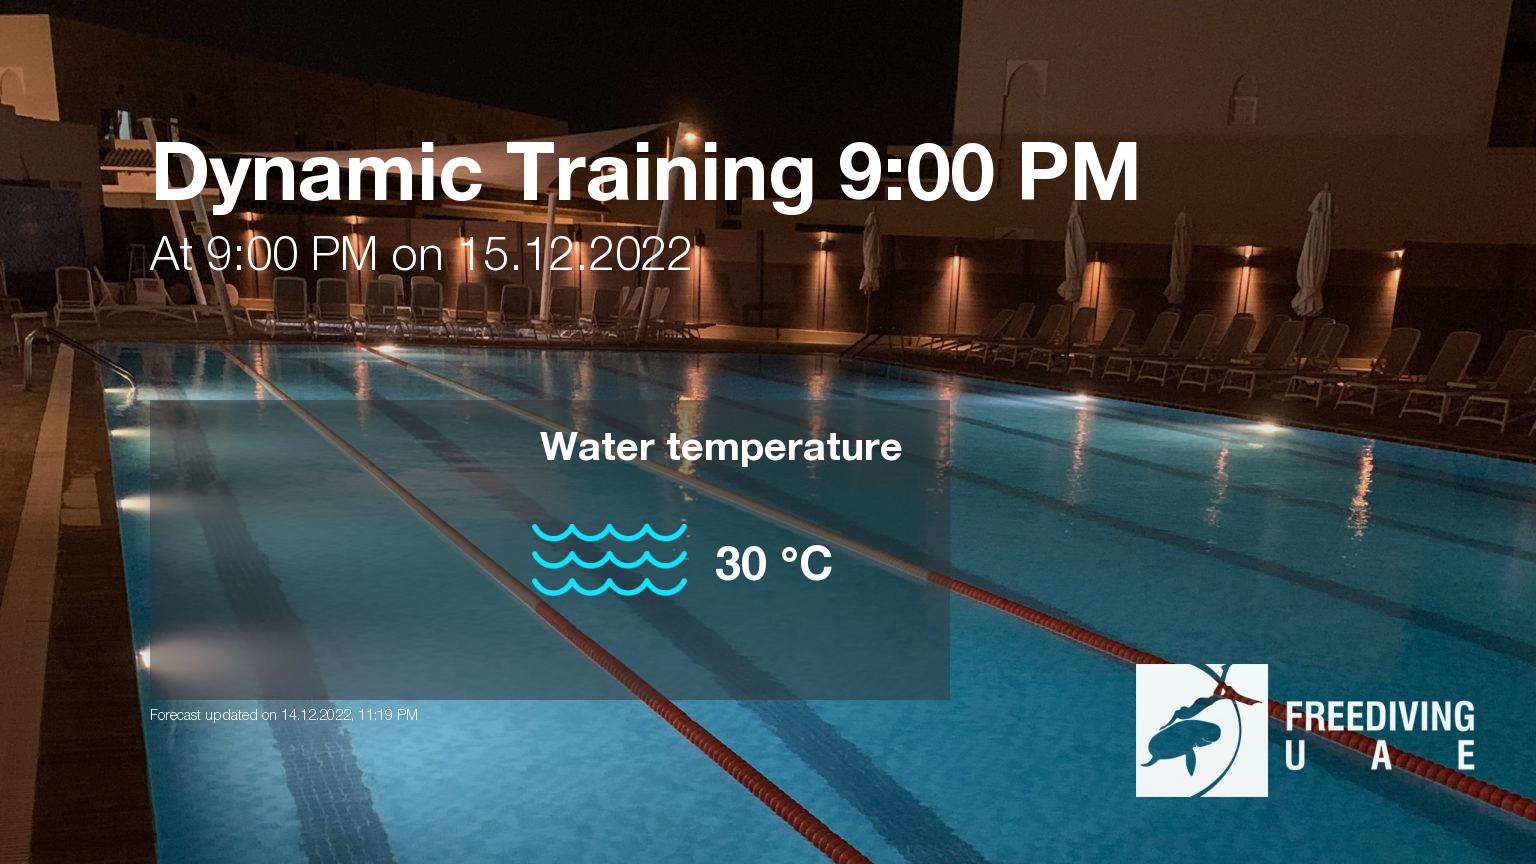 Expected weather during Dynamic Training 9:00 PM on Thu, Dec 15, at 9:00 PM